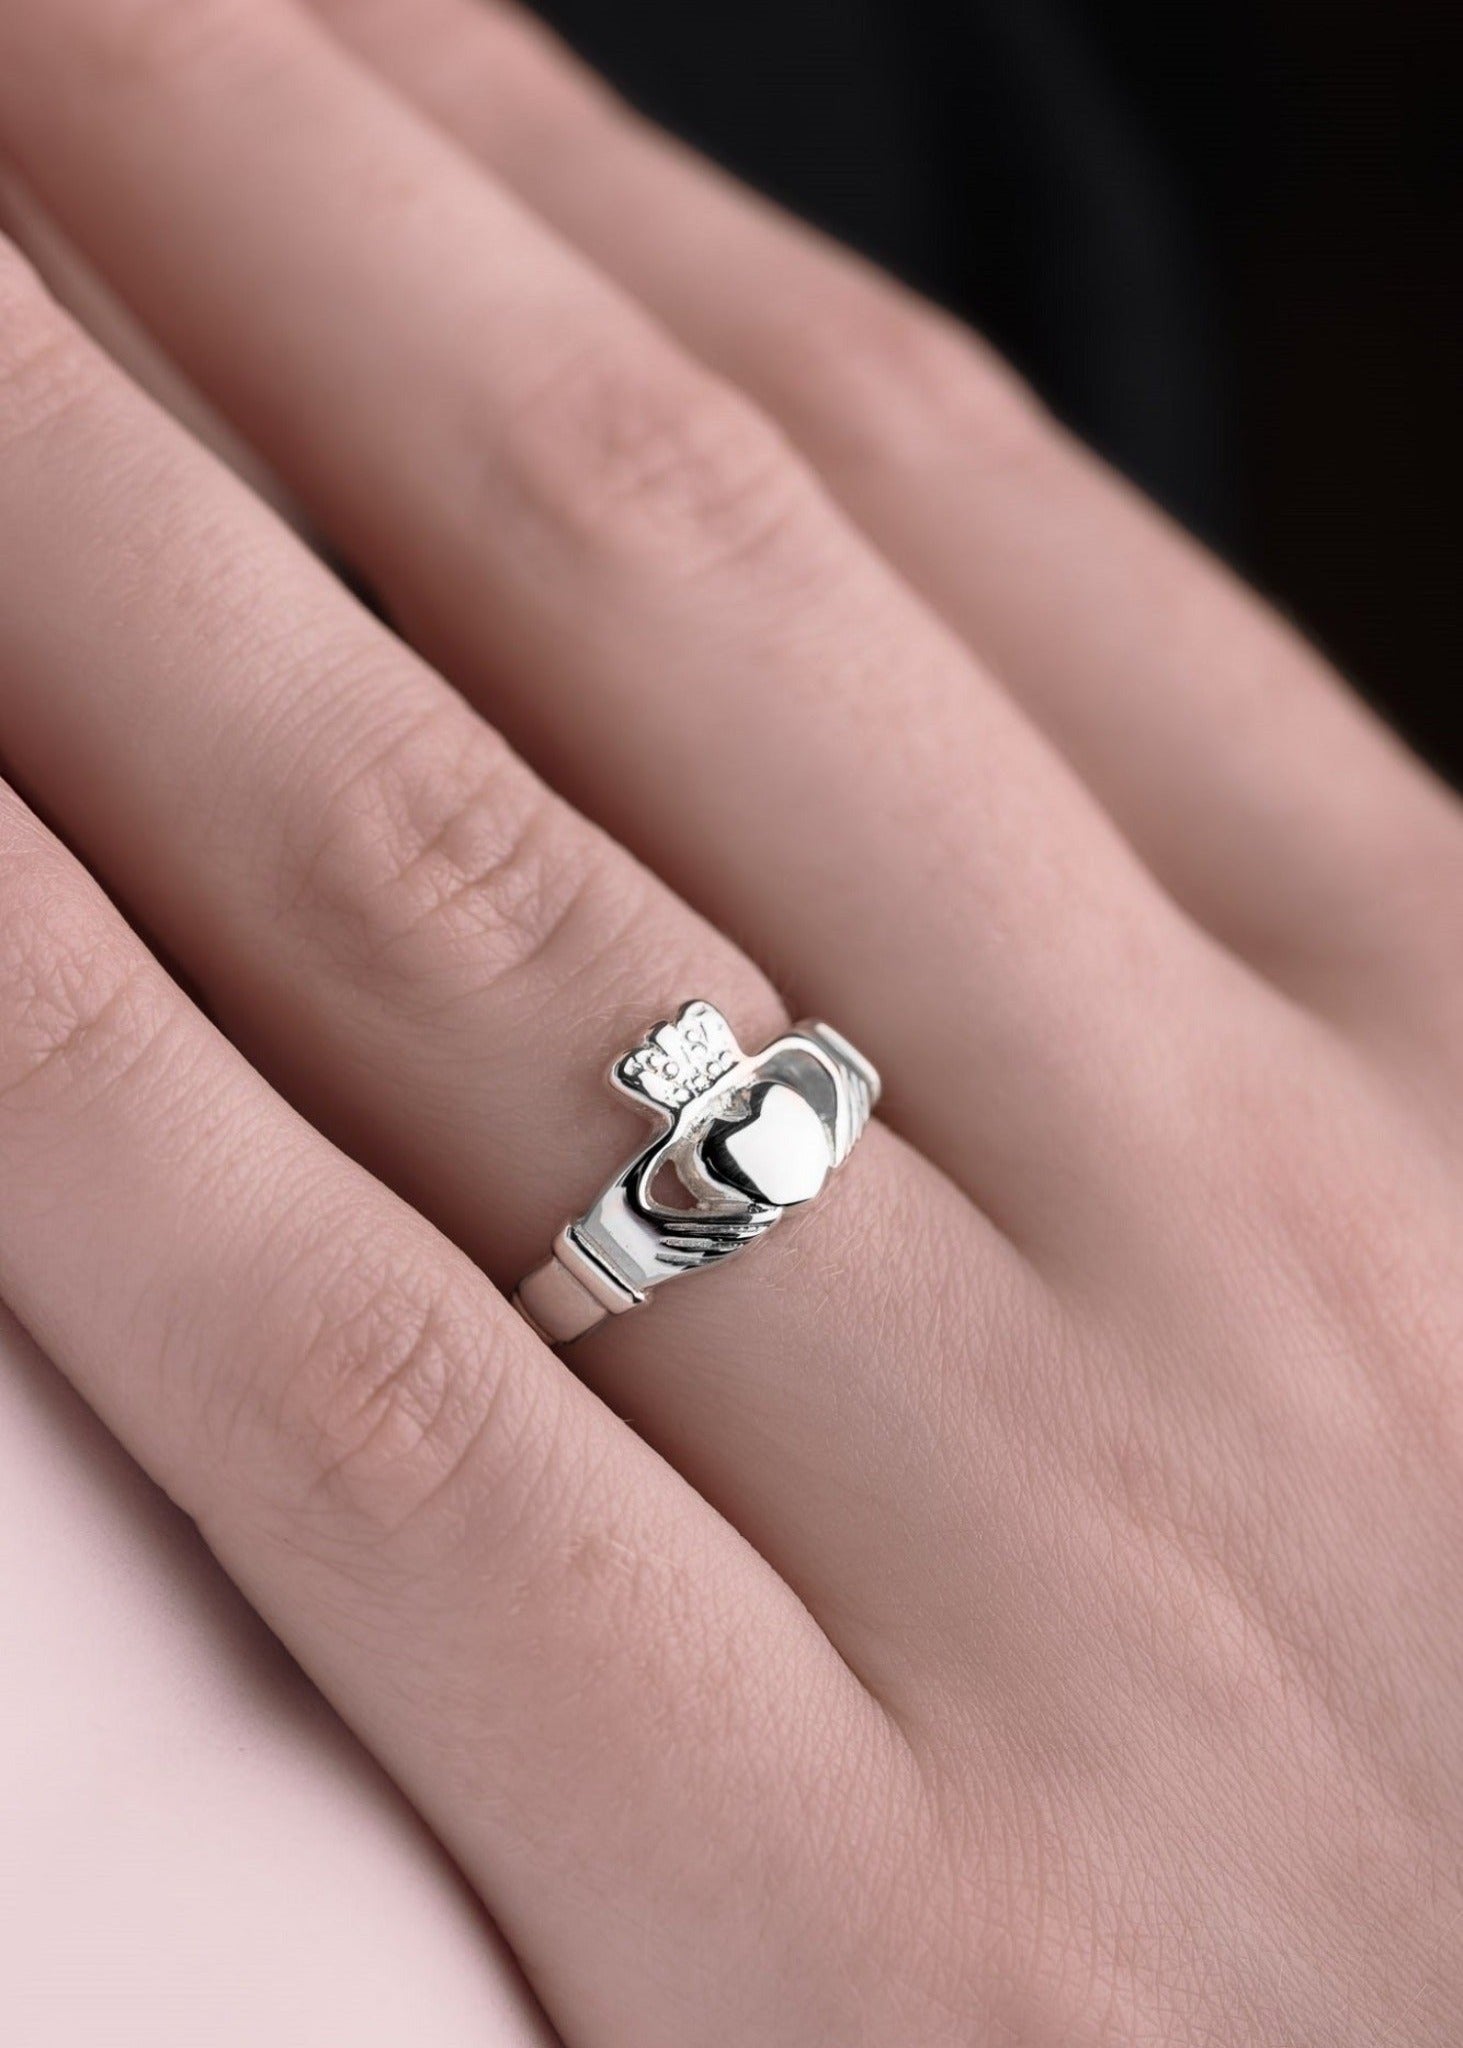 White gold claddagh ring on model